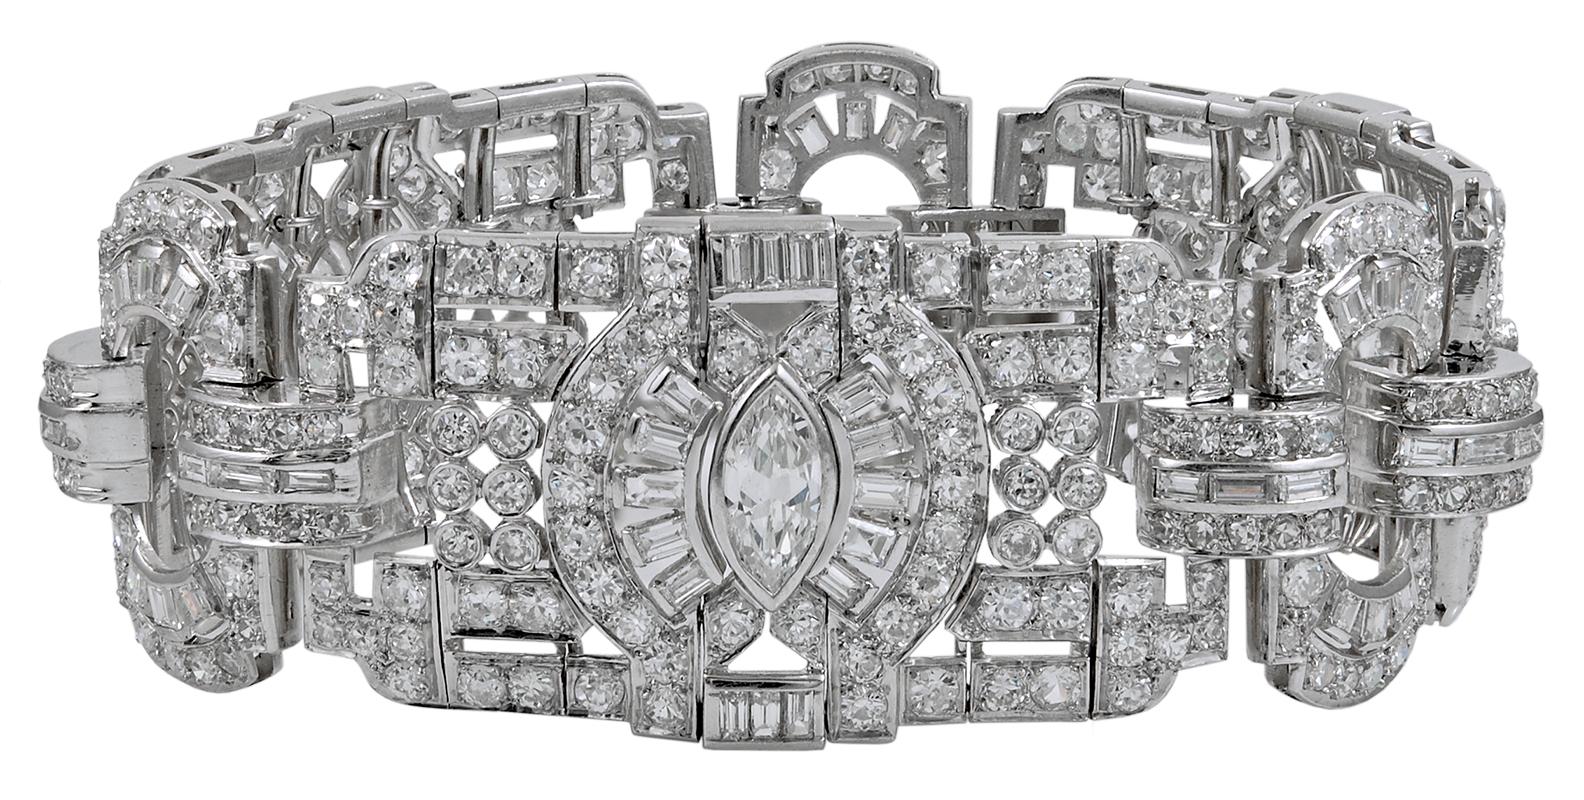 Art Deco-Style Diamond Articulated Link Bracelet in Platinum.
Diamond weight approx. 20.00 carats total. Measures approx. 7.75″ in length, inner circumference approx. 7.5″, 1″ width, 0.25″ in height off the wrist. Seamless foldover clasp with chain